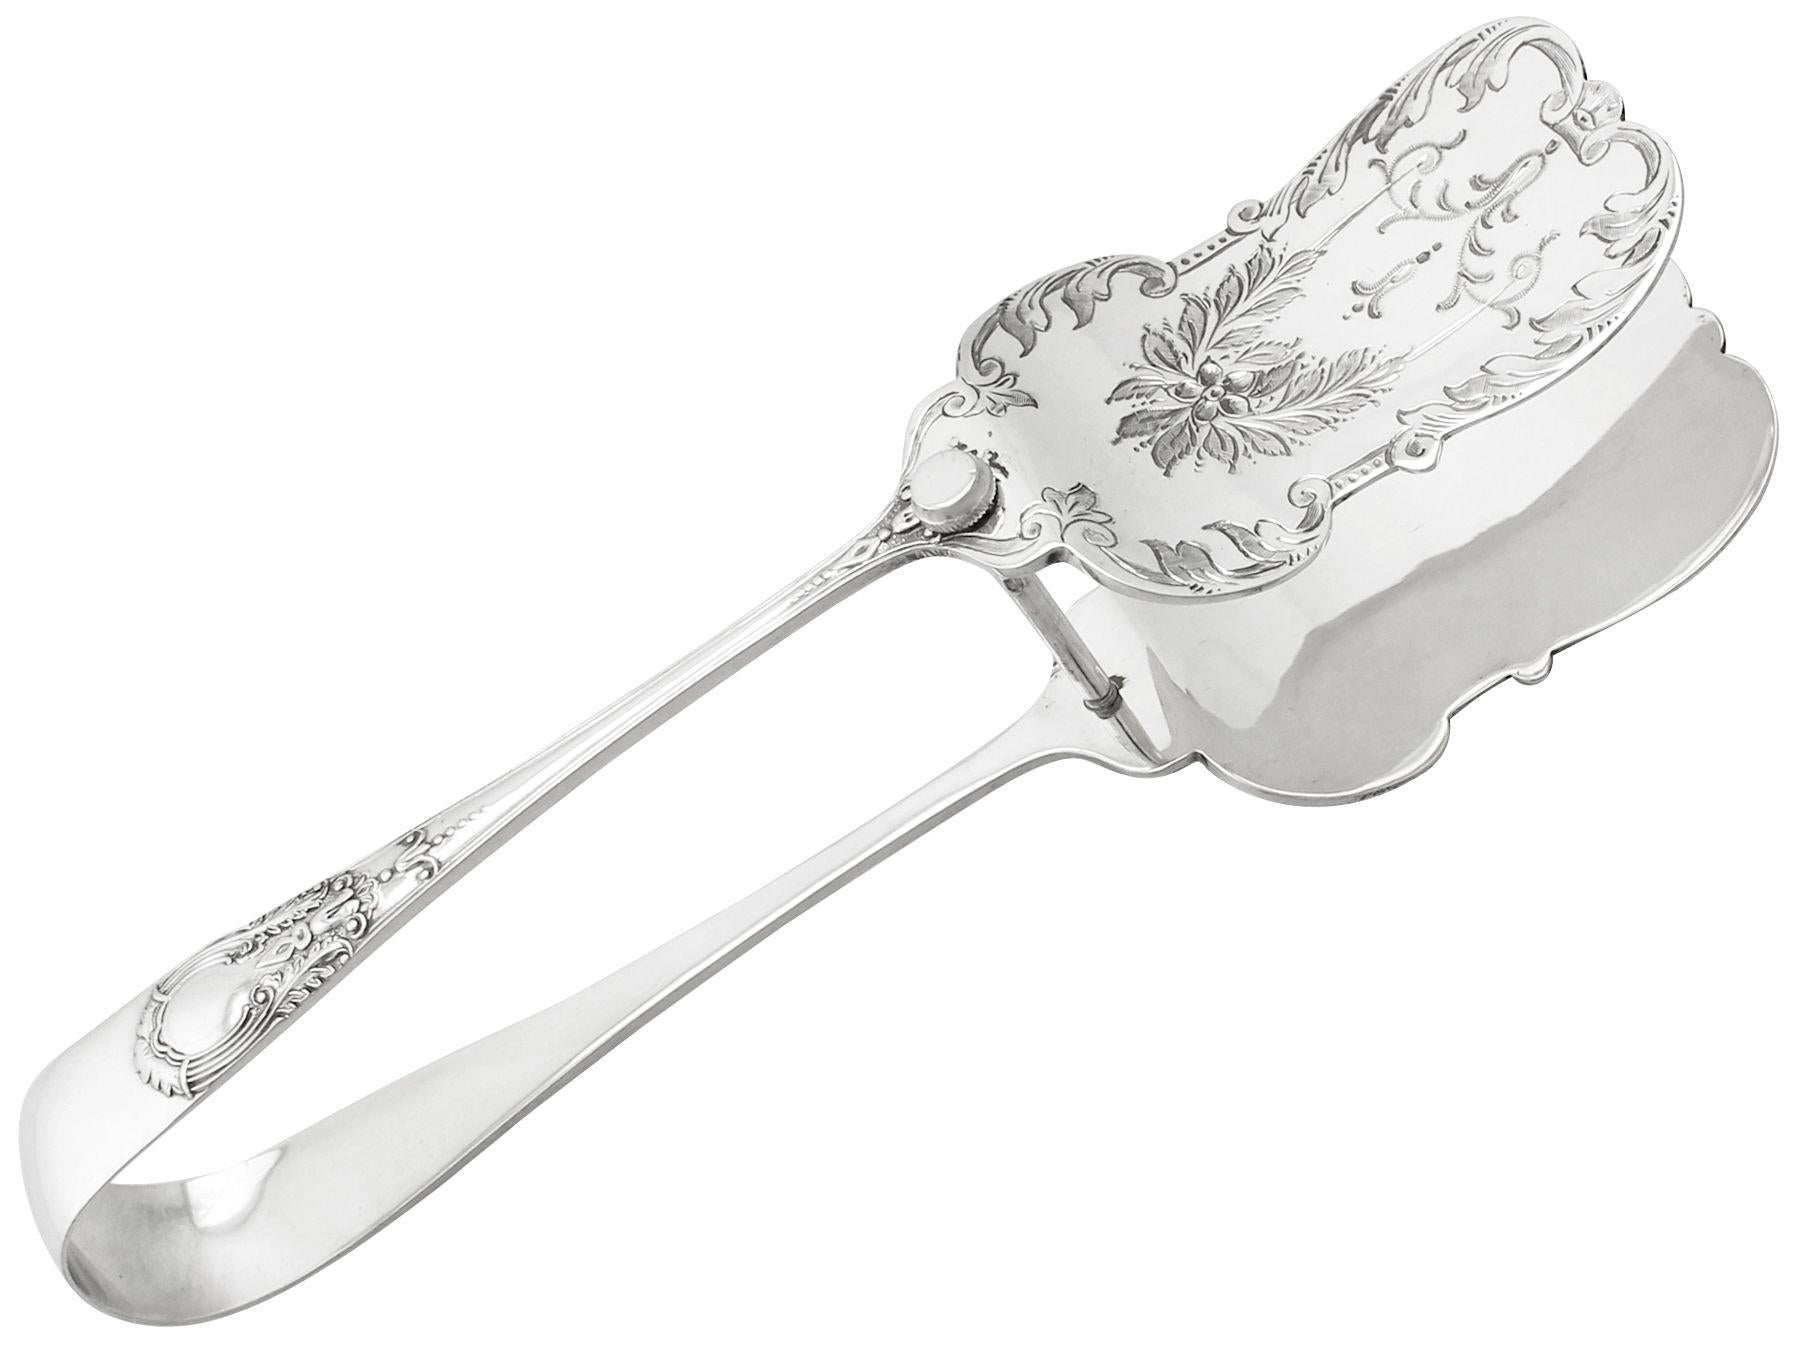 An exceptional, fine and impressive pair of antique Edwardian English sterling silver asparagus tongs; an addition to our silver flatware collection.

These exceptional antique Edwardian sterling silver asparagus server tongs have a rectangular